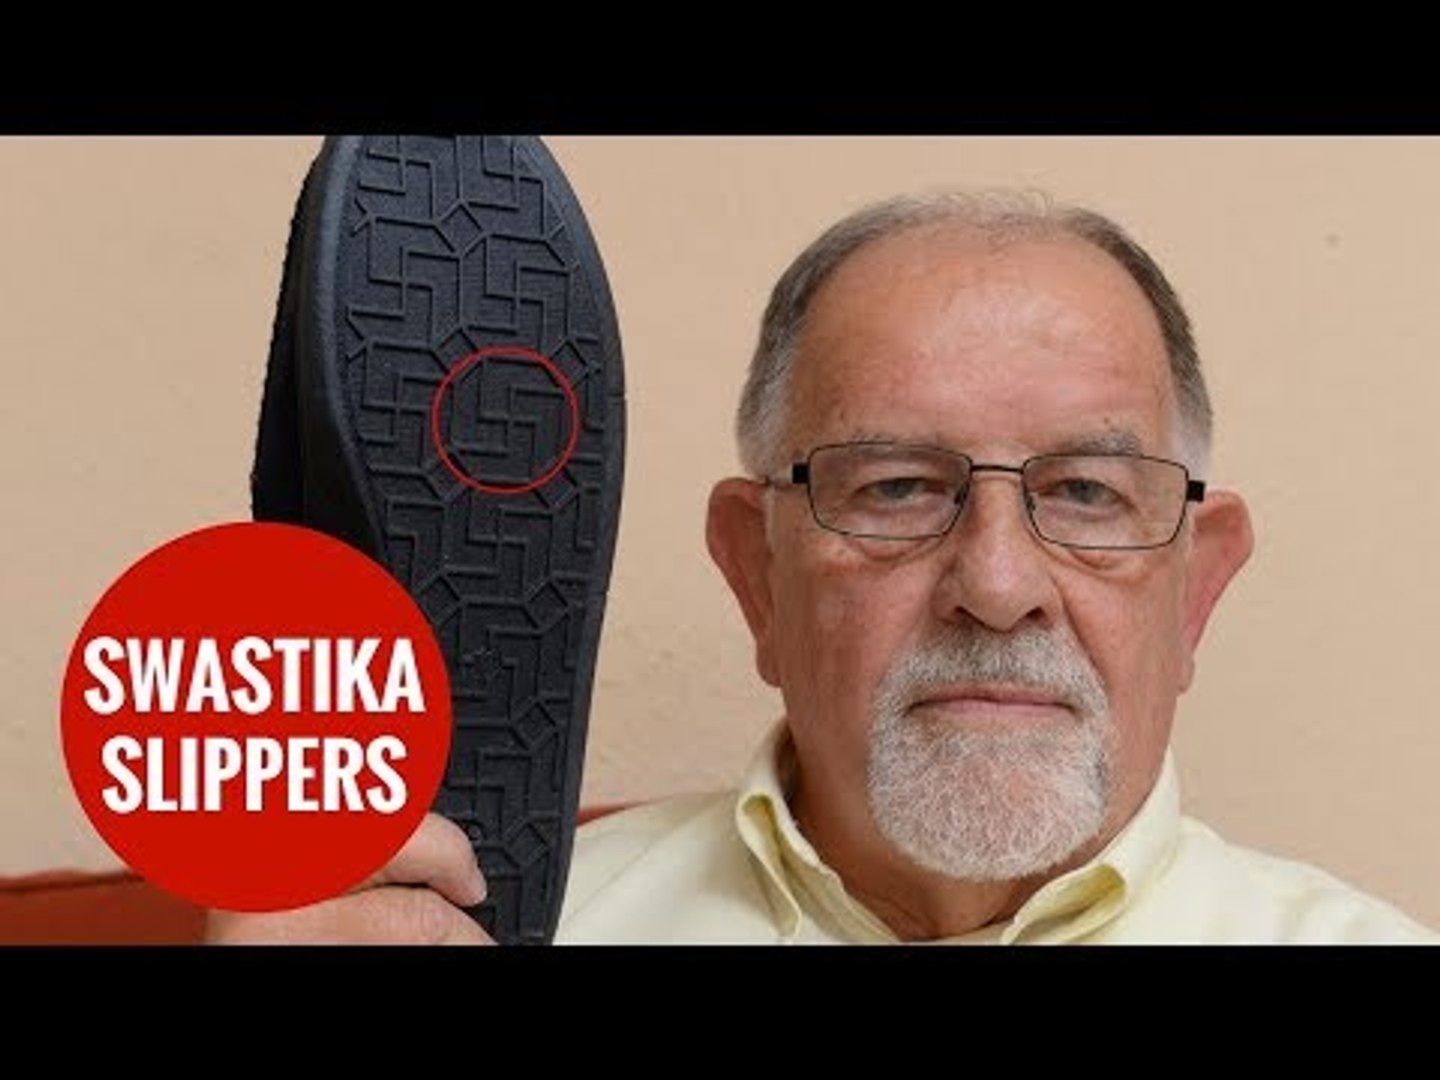 Pensioners new slippers have Nazi swastika emblem on sole - video  Dailymotion